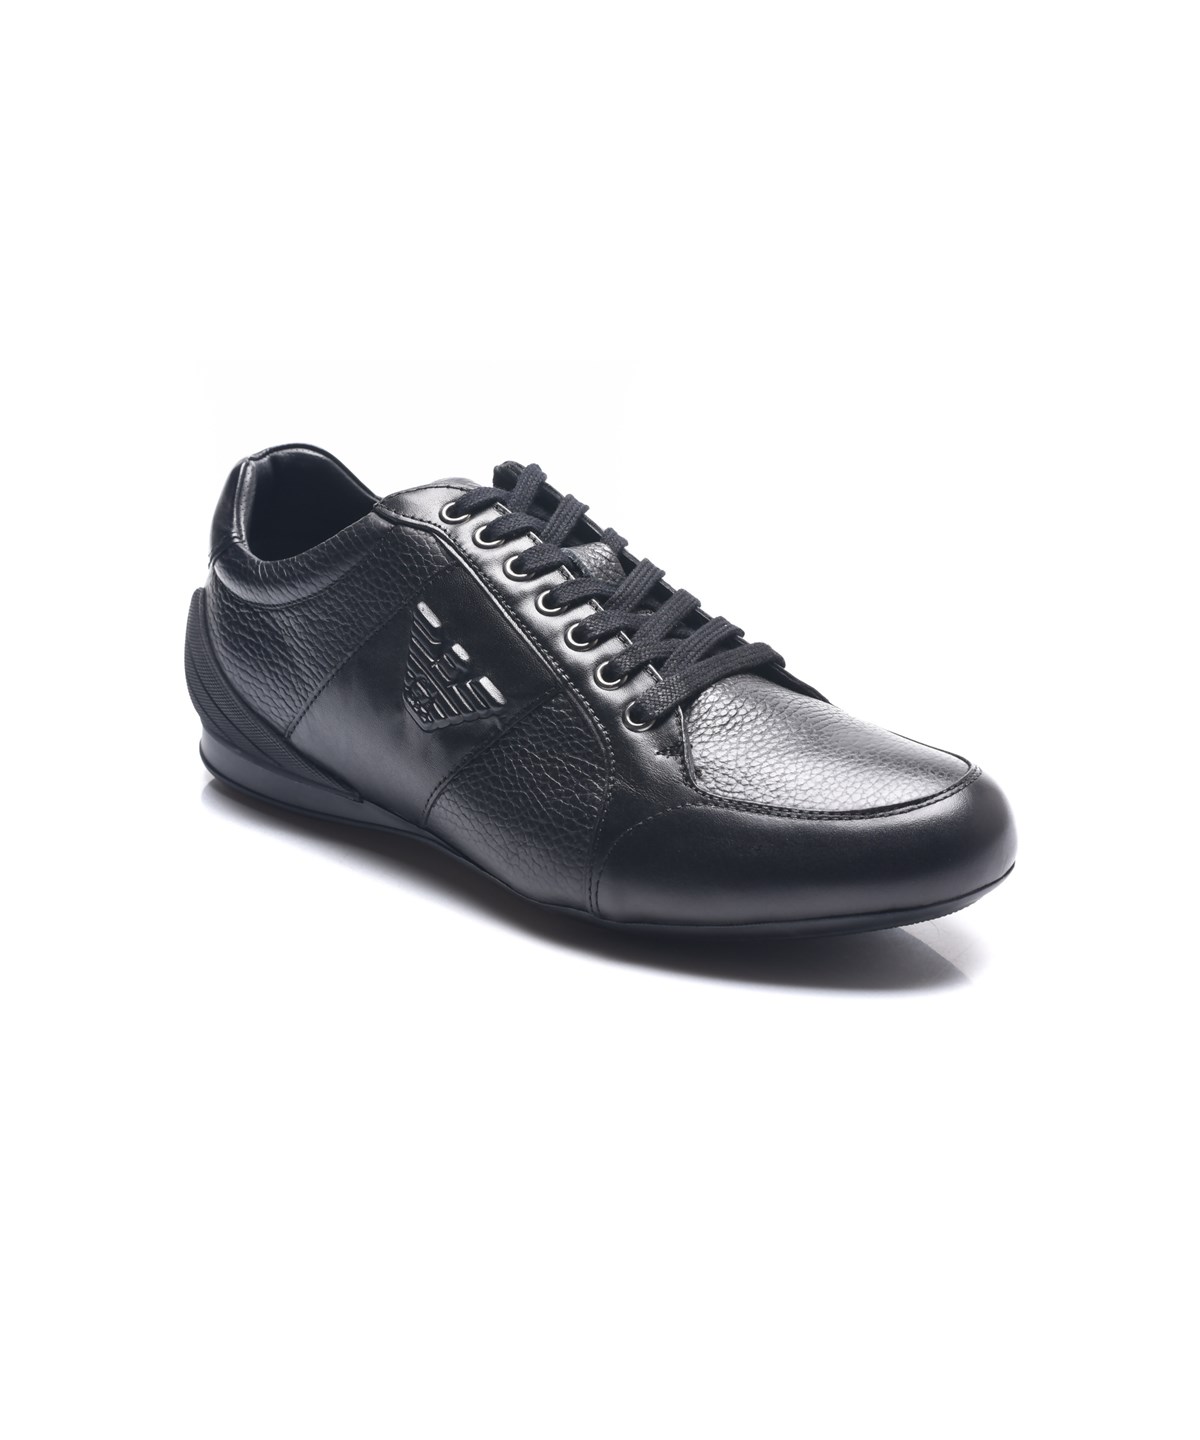 Leather Ga Logo Sneakers Shoes Black 